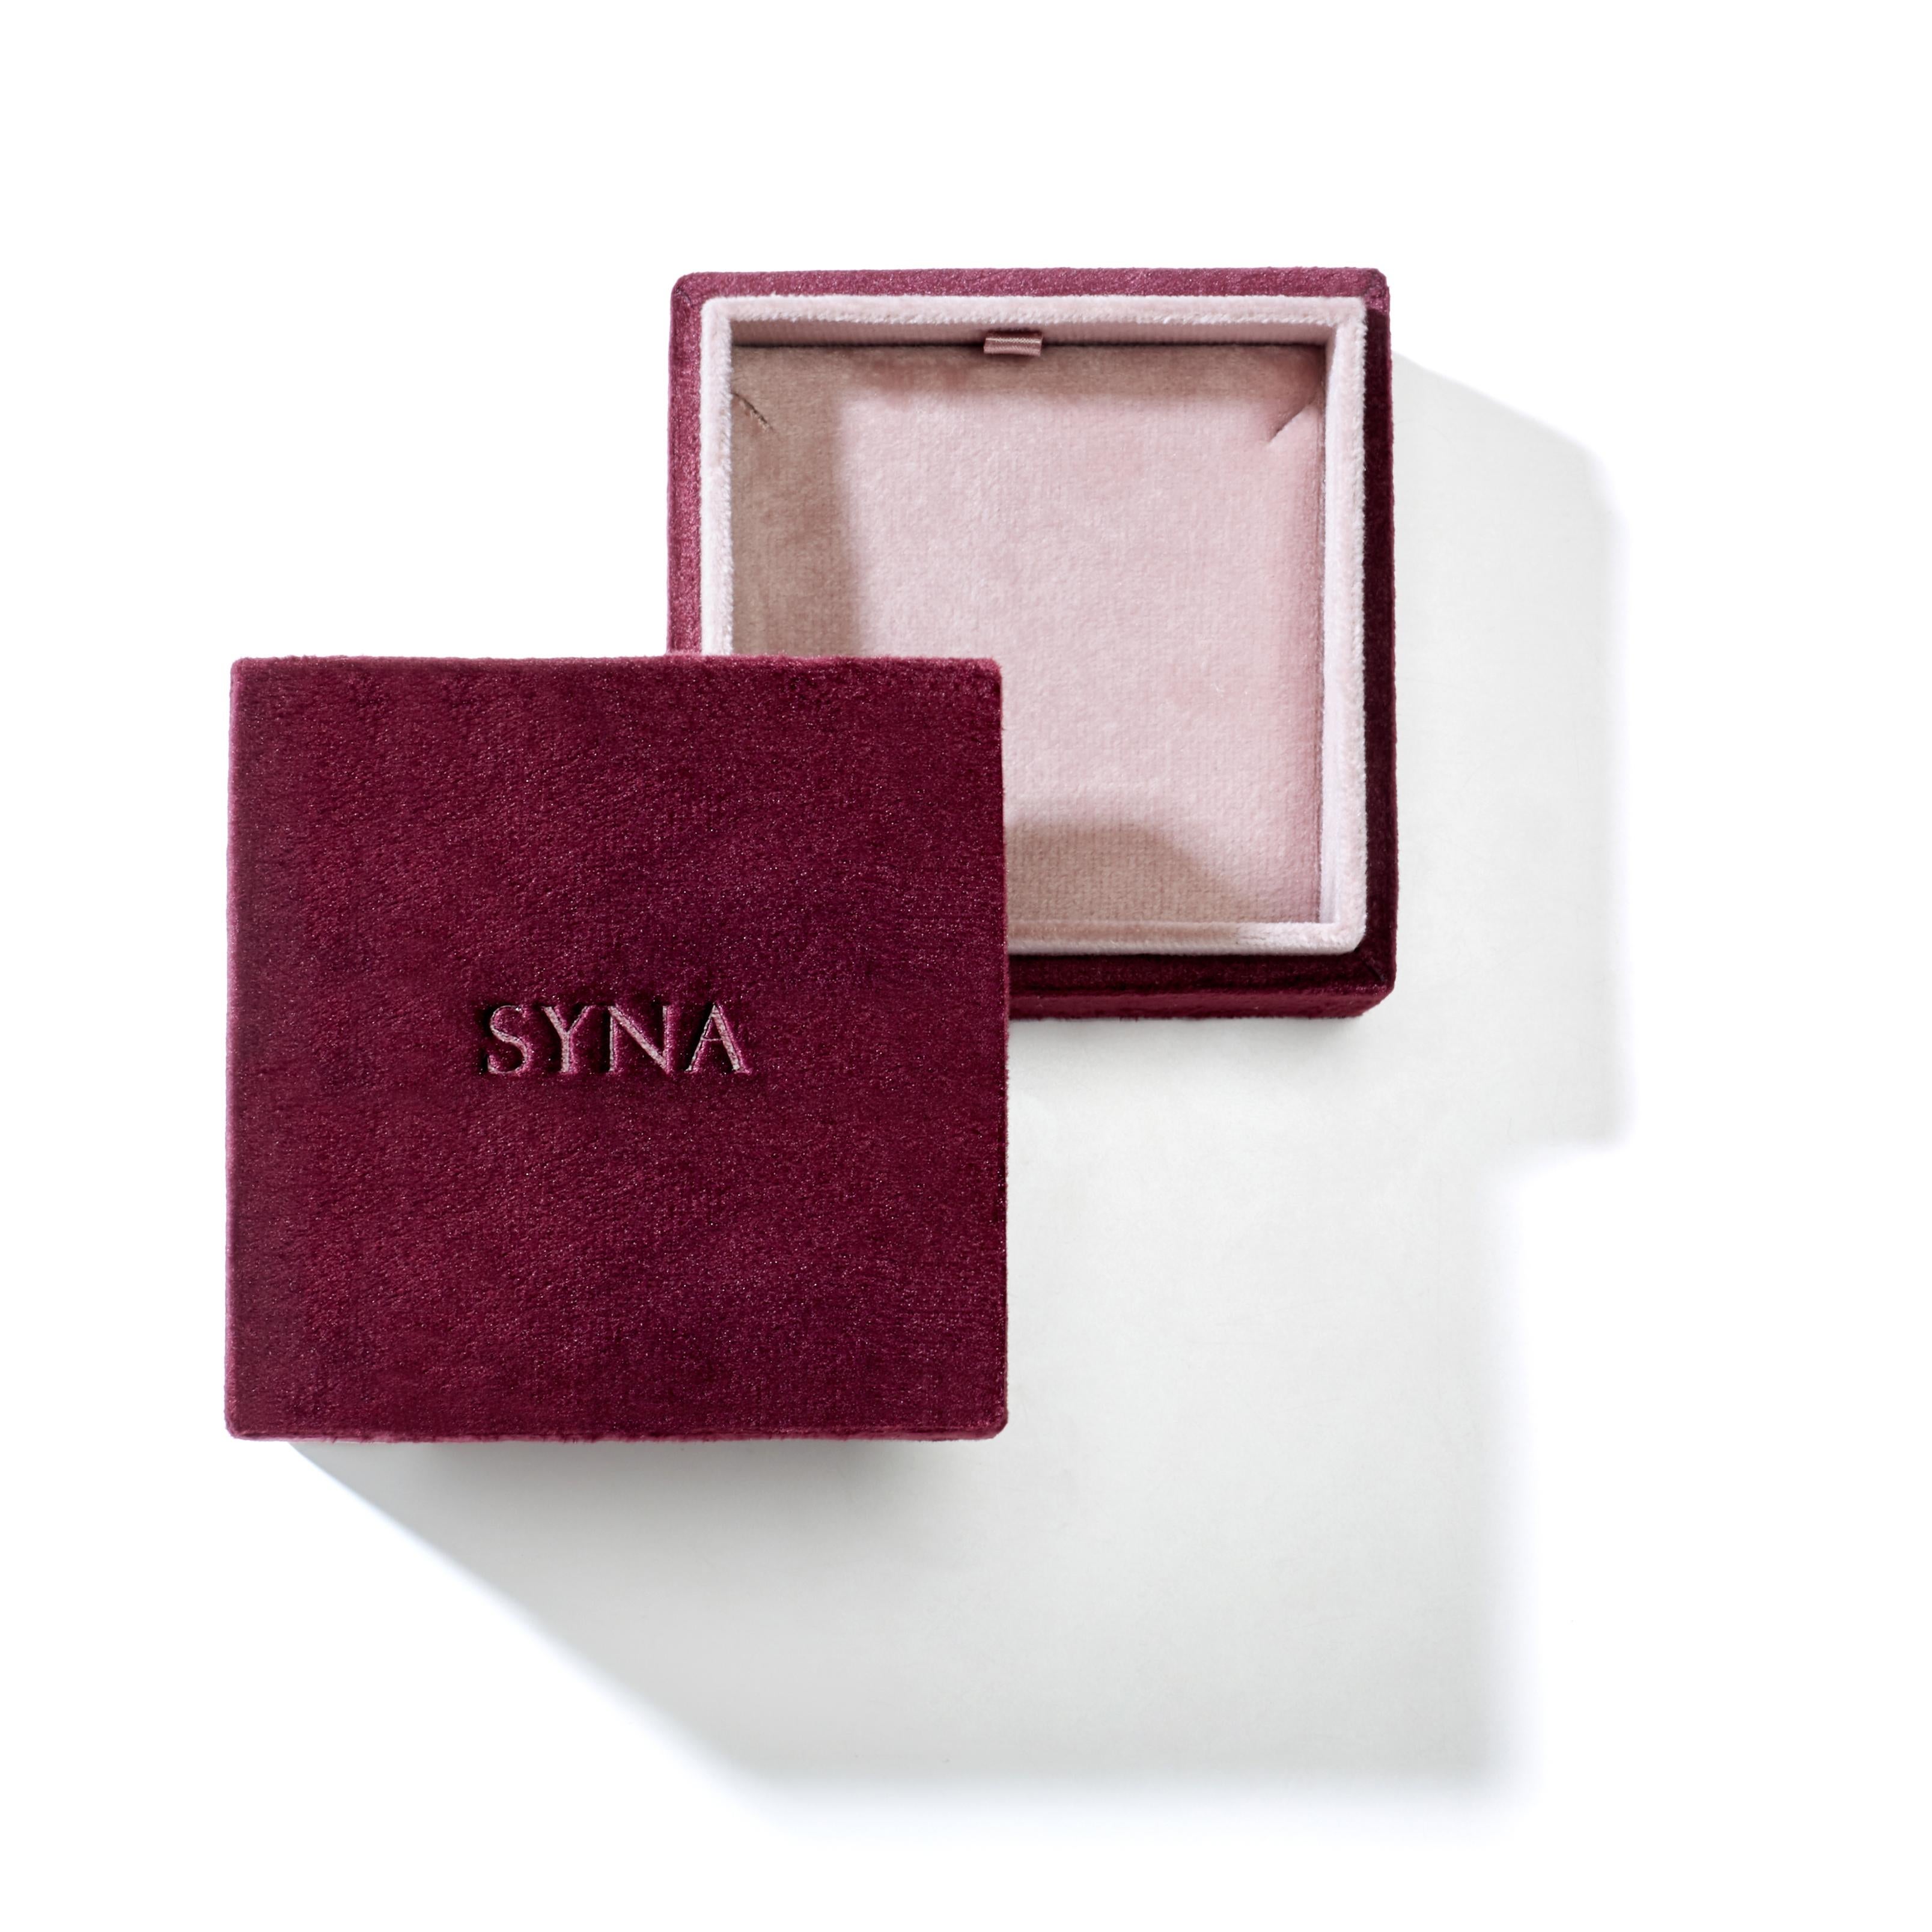 syna packaging